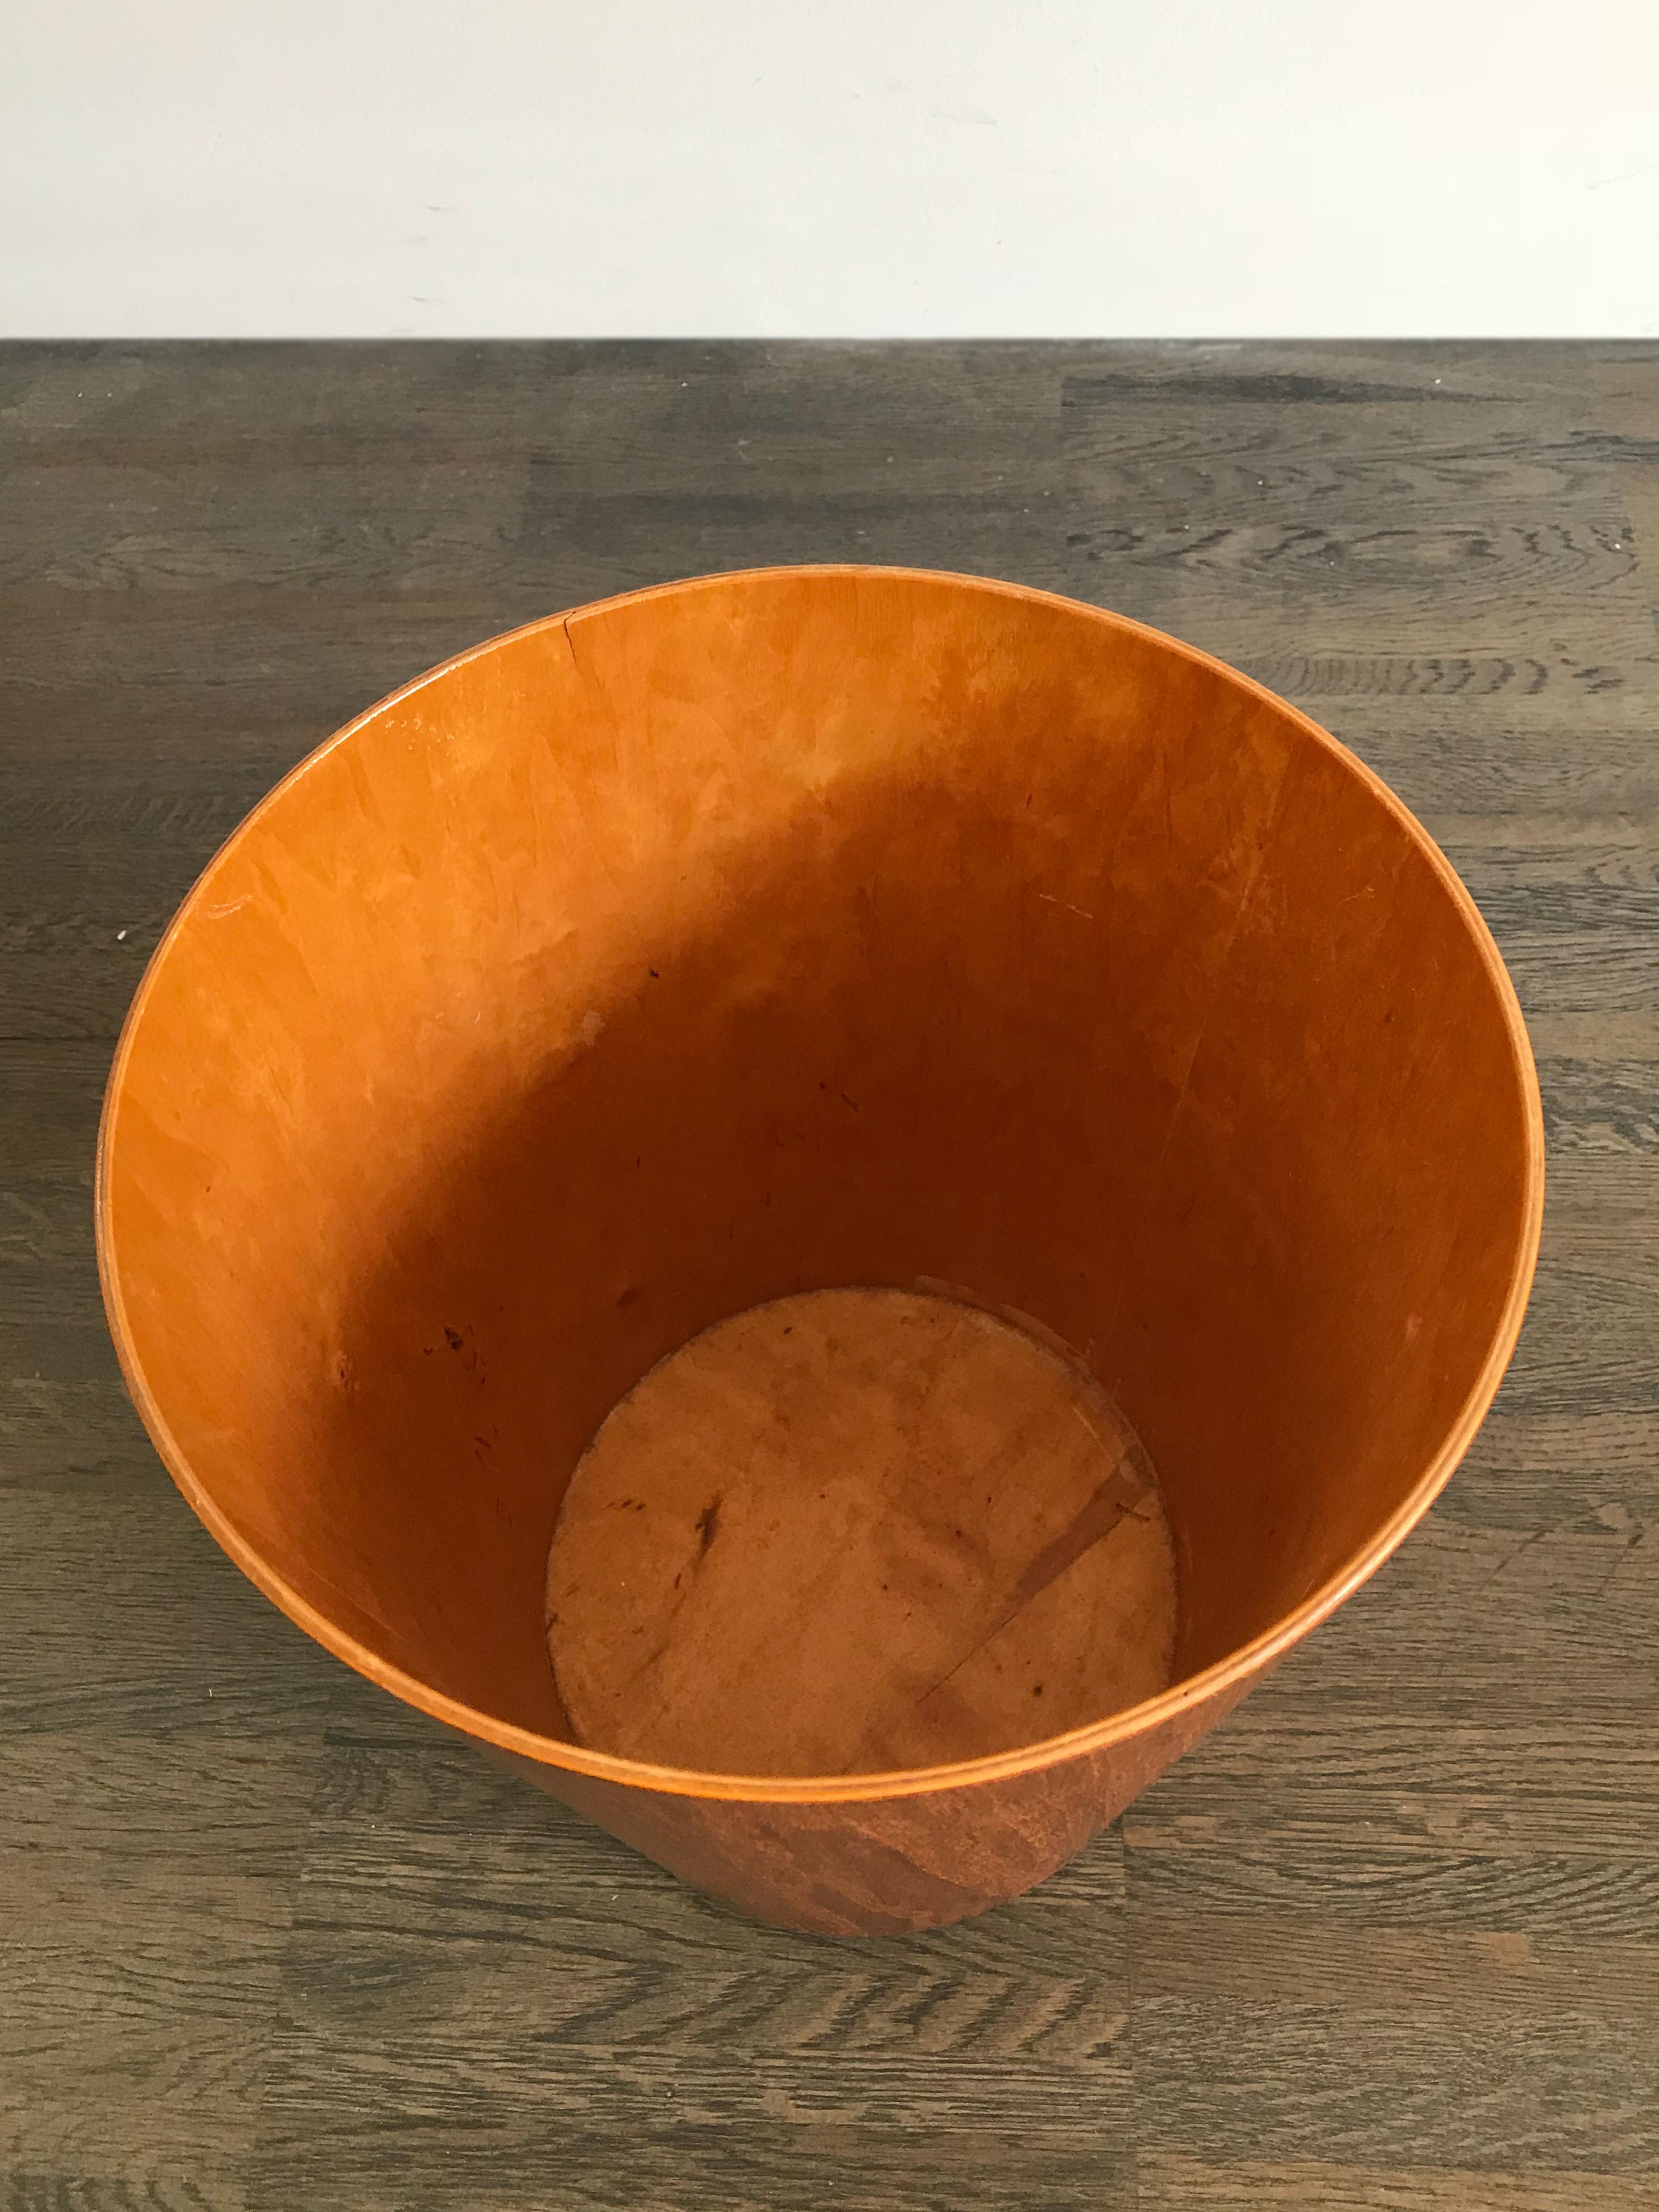 Swedish teak Mid-Century Modern trash can or paper basket, circa 1960s.
Please note that the item is original of the period and thus shows normal signs of age and use.